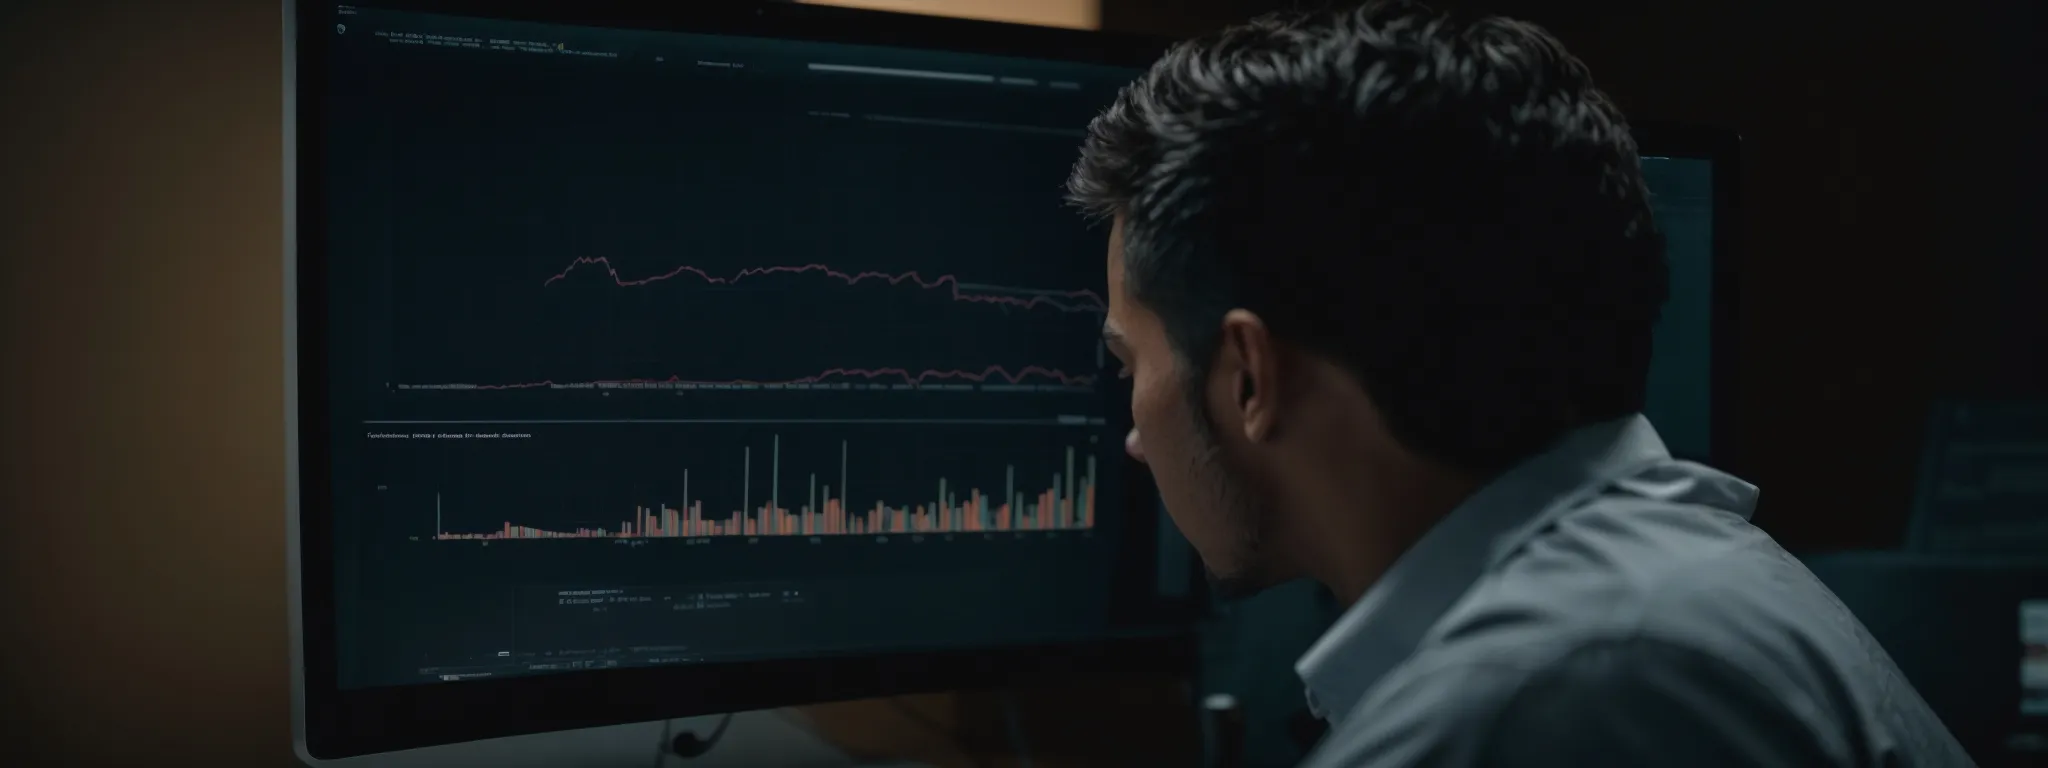 a focused individual gazes intently at a computer screen, graph lines ascending as they analyze a dashboard of website analytics.